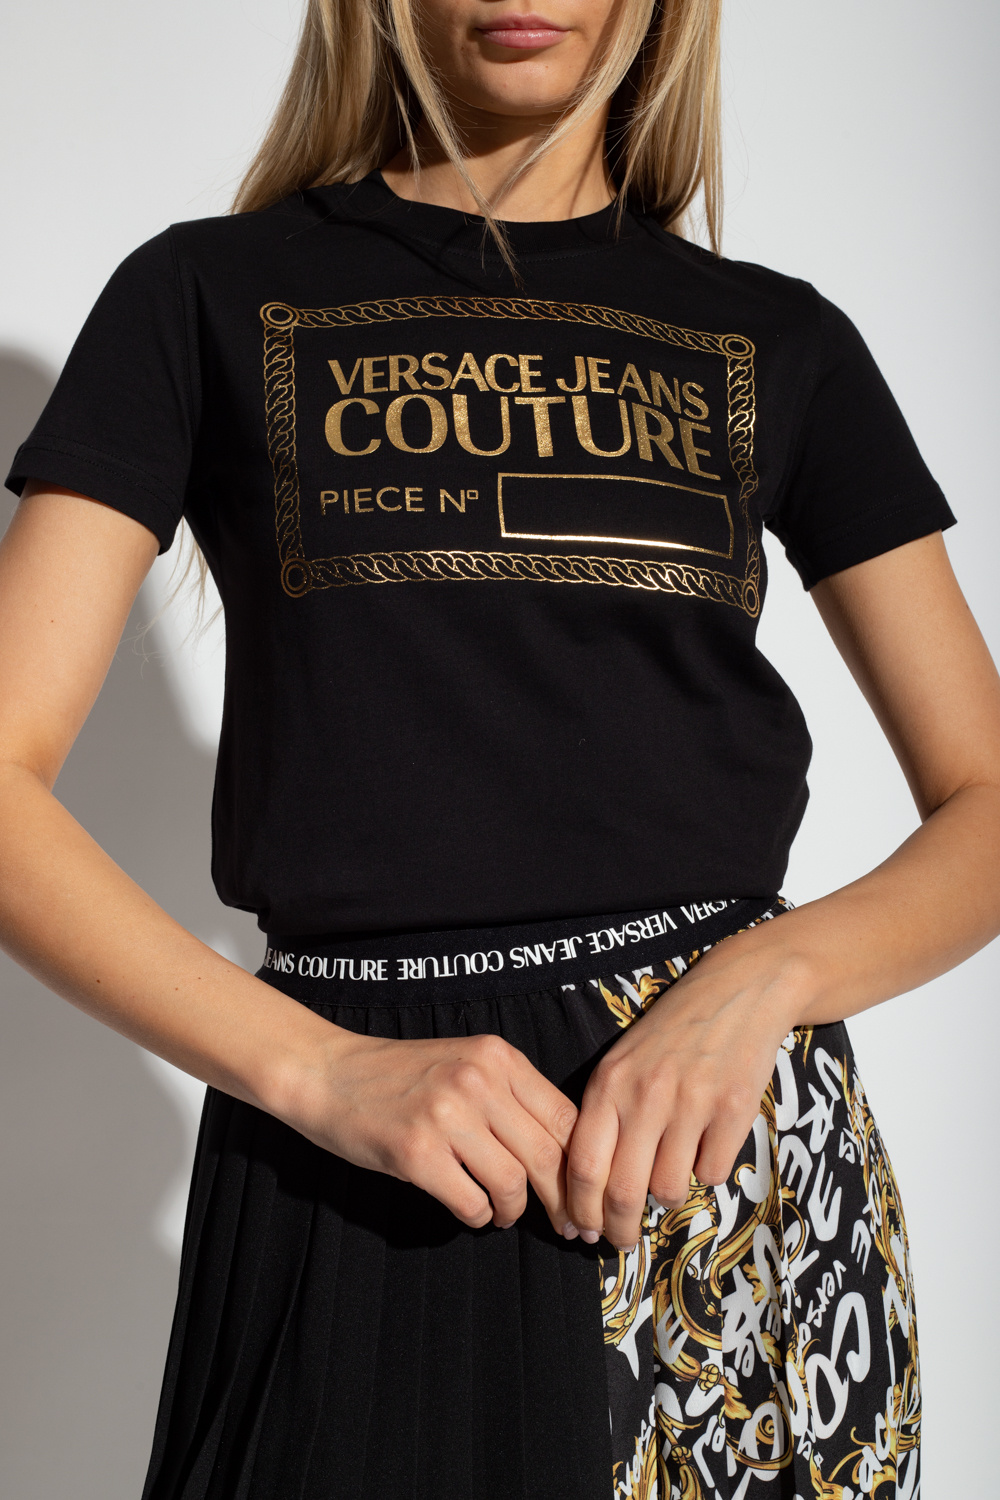 Versace Jeans Couture Remain warm yet stylish wearing Bailey 1 2 Zip sweater